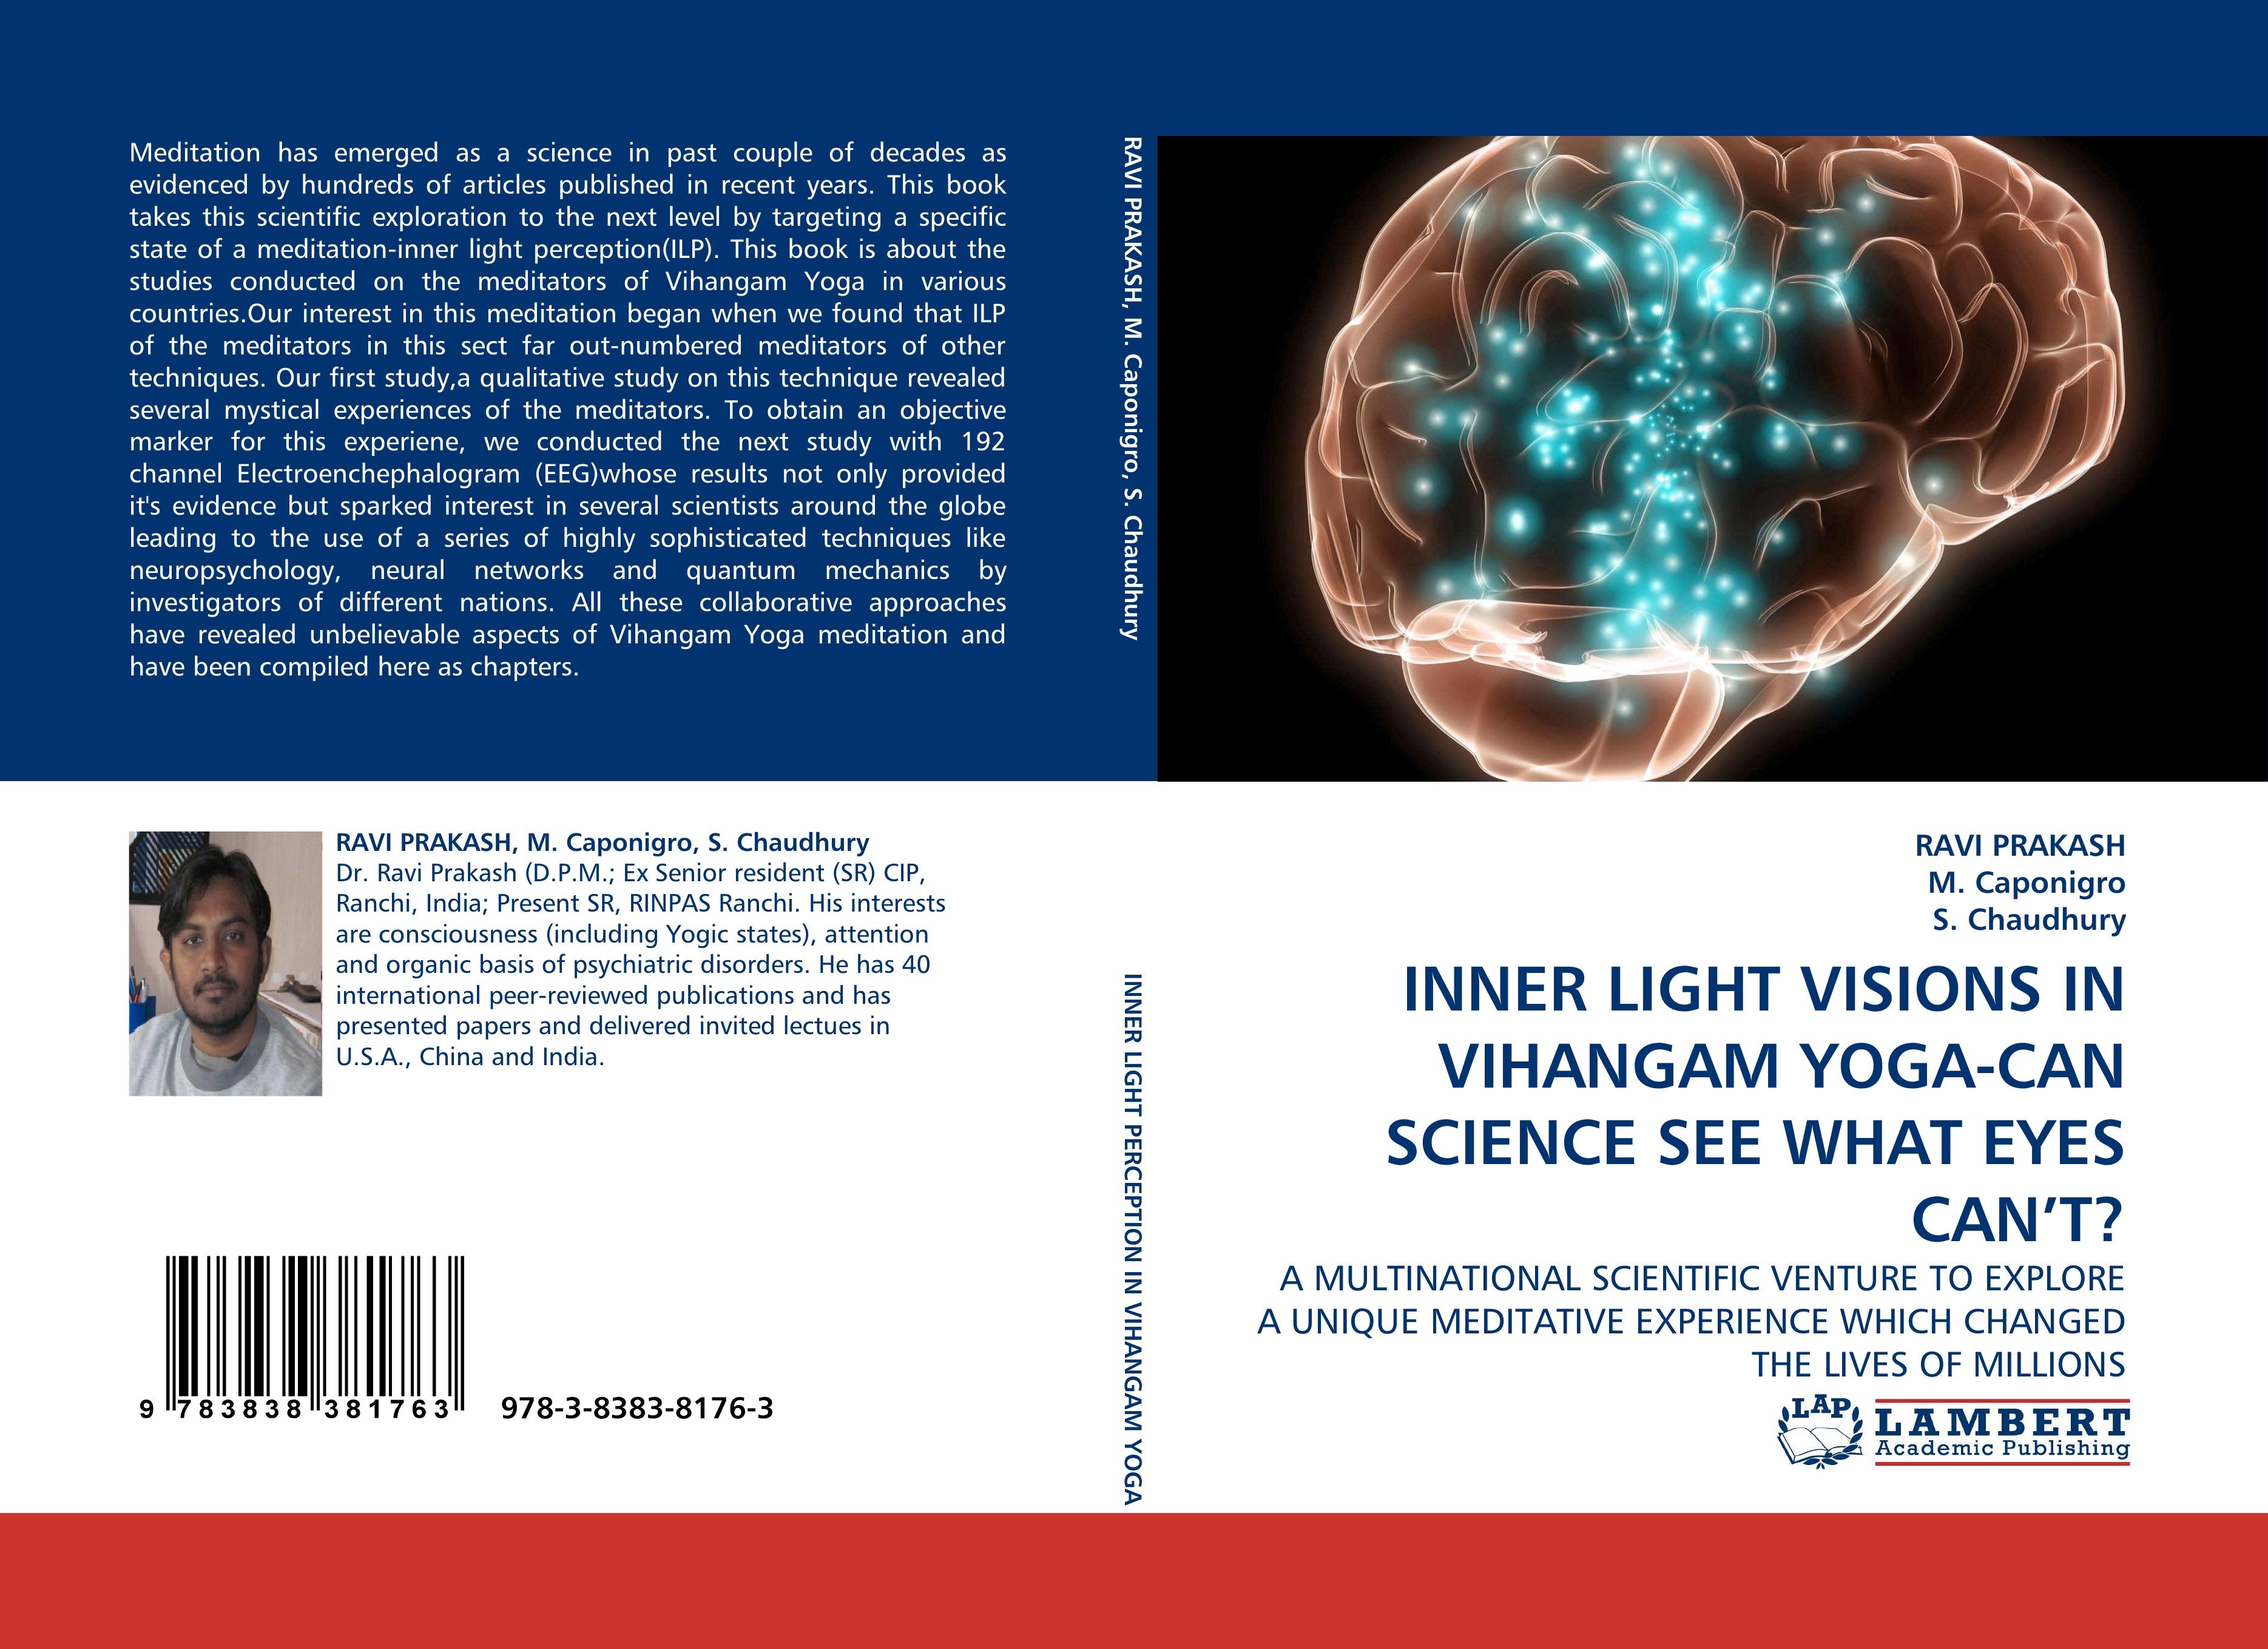 INNER LIGHT VISIONS IN VIHANGAM YOGA-CAN SCIENCE SEE WHAT EYES CAN T? - Ravi Prakash M. Caponigro S. Chaudhury